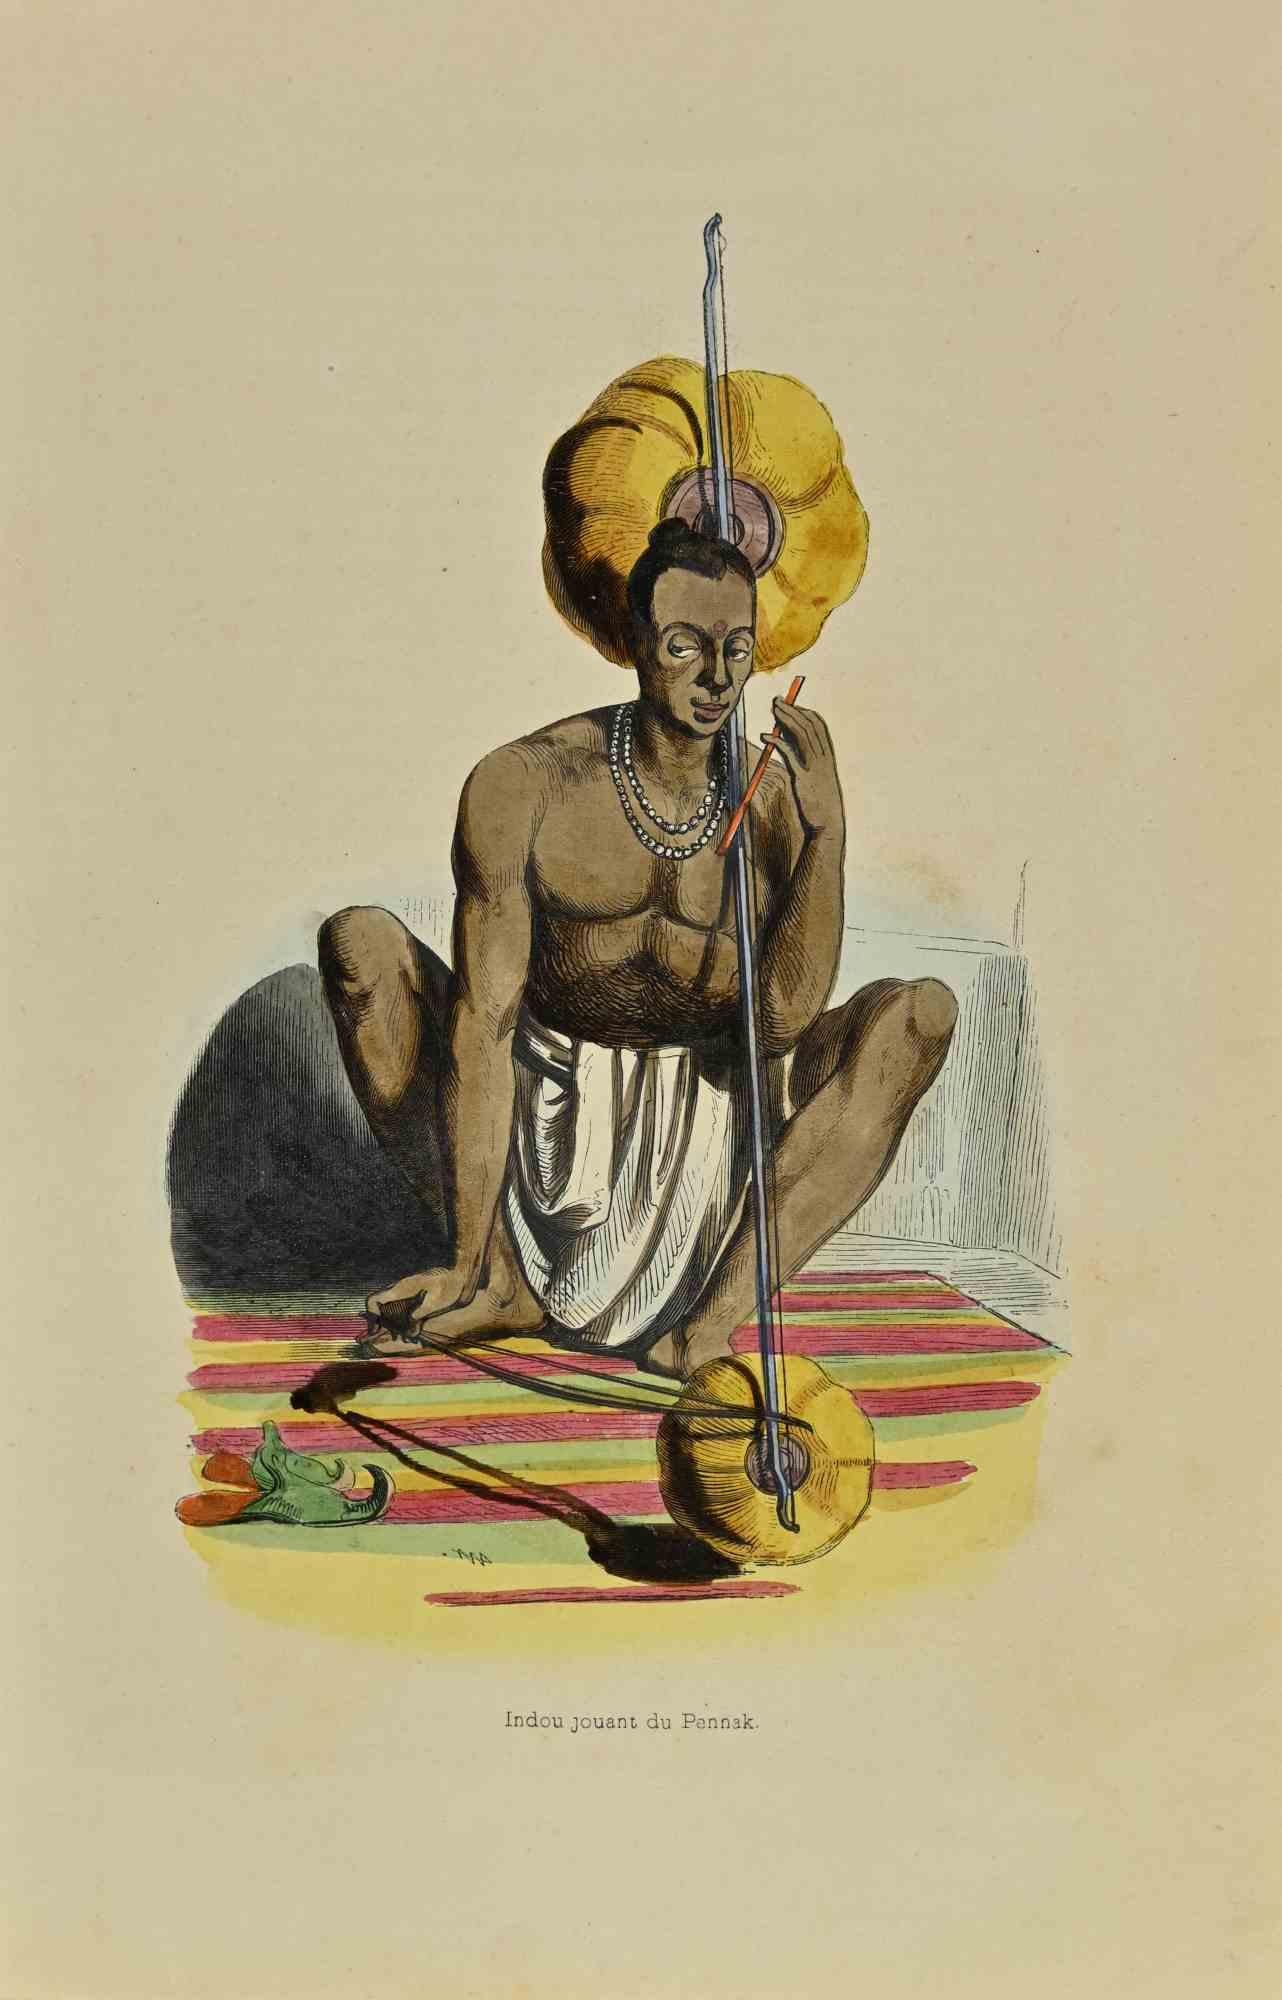 Indou Playing the Pannak is a lithograph made by Auguste Wahlen in 1844.

Hand colored.

Good condition.

At the center of the artwork is the original title "Indou jouant du Pannak".

The work is part of Suite Moeurs, usages et costumes de tous les